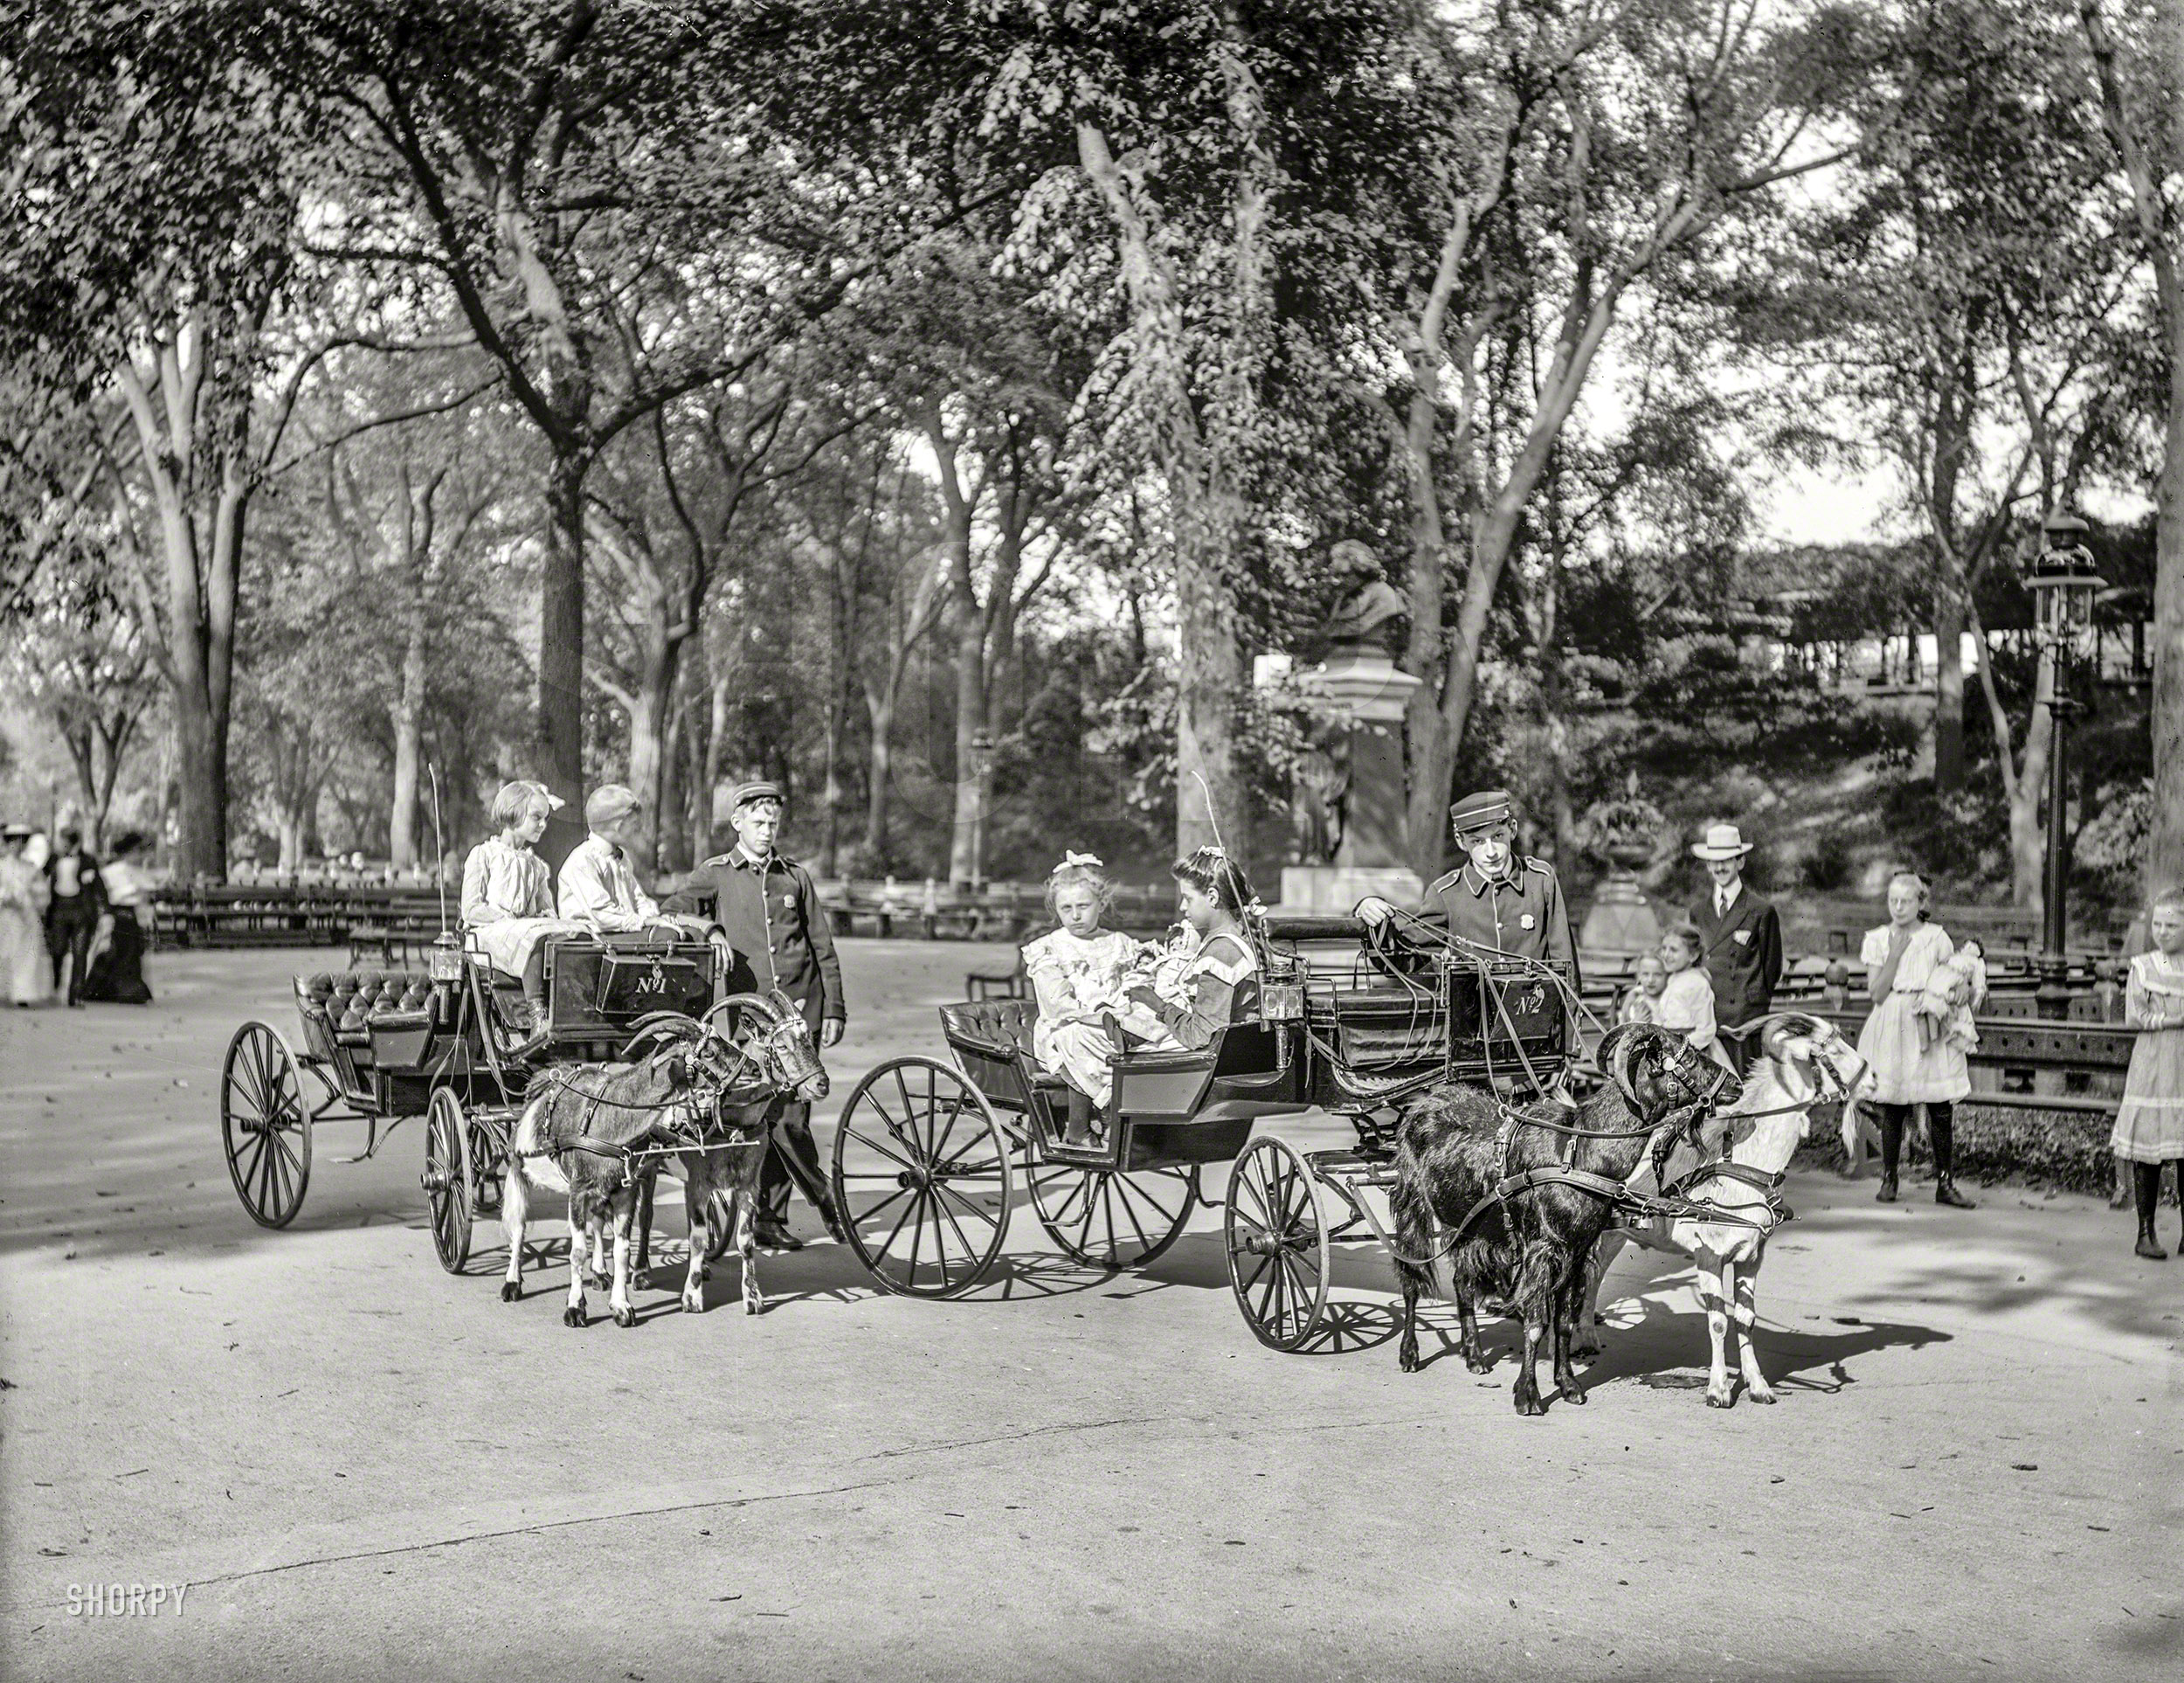 New York, 1904. "Goat carriages in Central Park." 8x10 inch dry plate glass negative, Detroit Publishing Company. View full size.